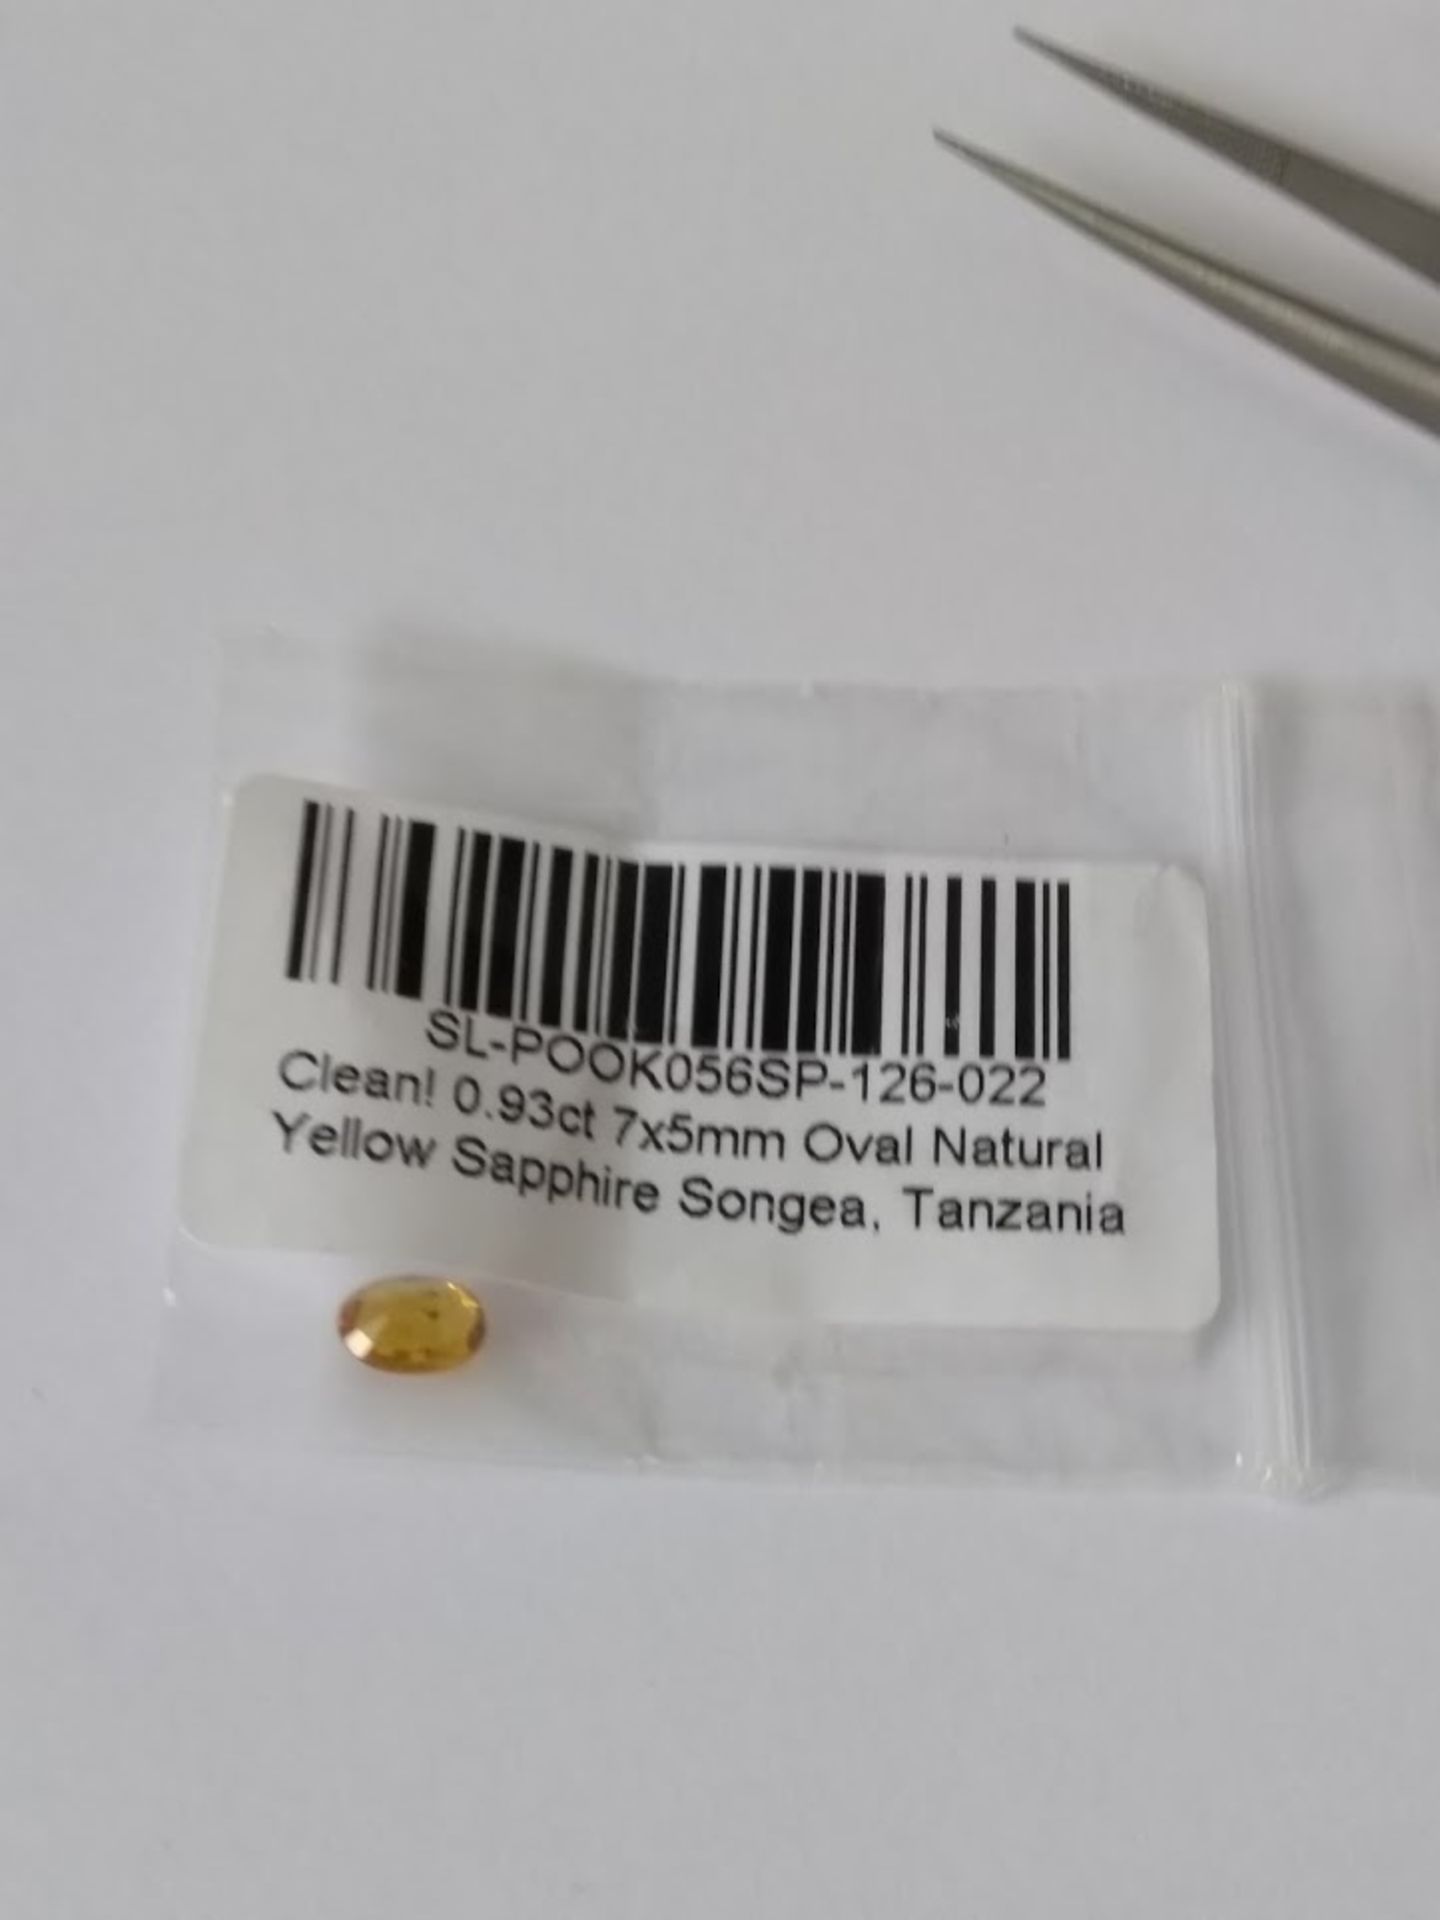 A Stunning 0.93 Cts Natural Golden Yellow Sapphire - Natural No Filling - Transparent - VS Clarity. - Image 2 of 2